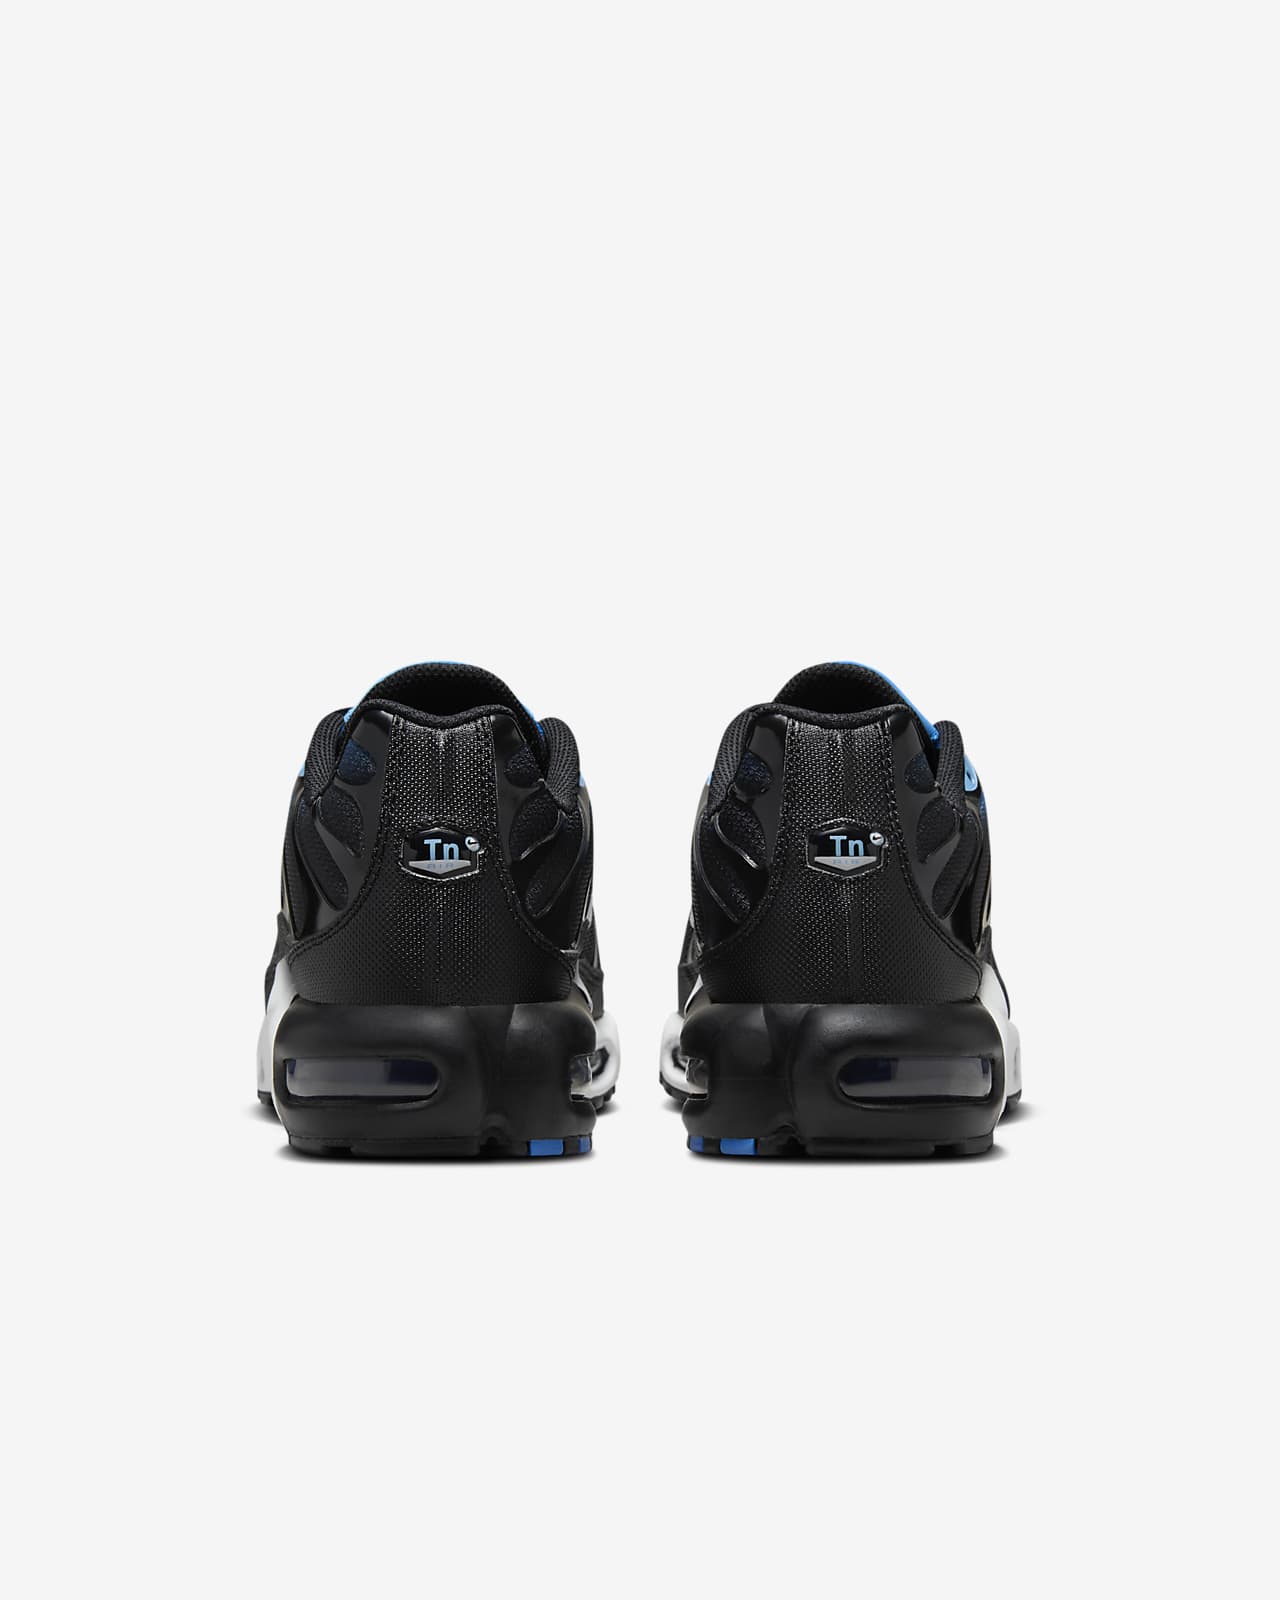 NIKE TN EDITION LIMITEE HOMME